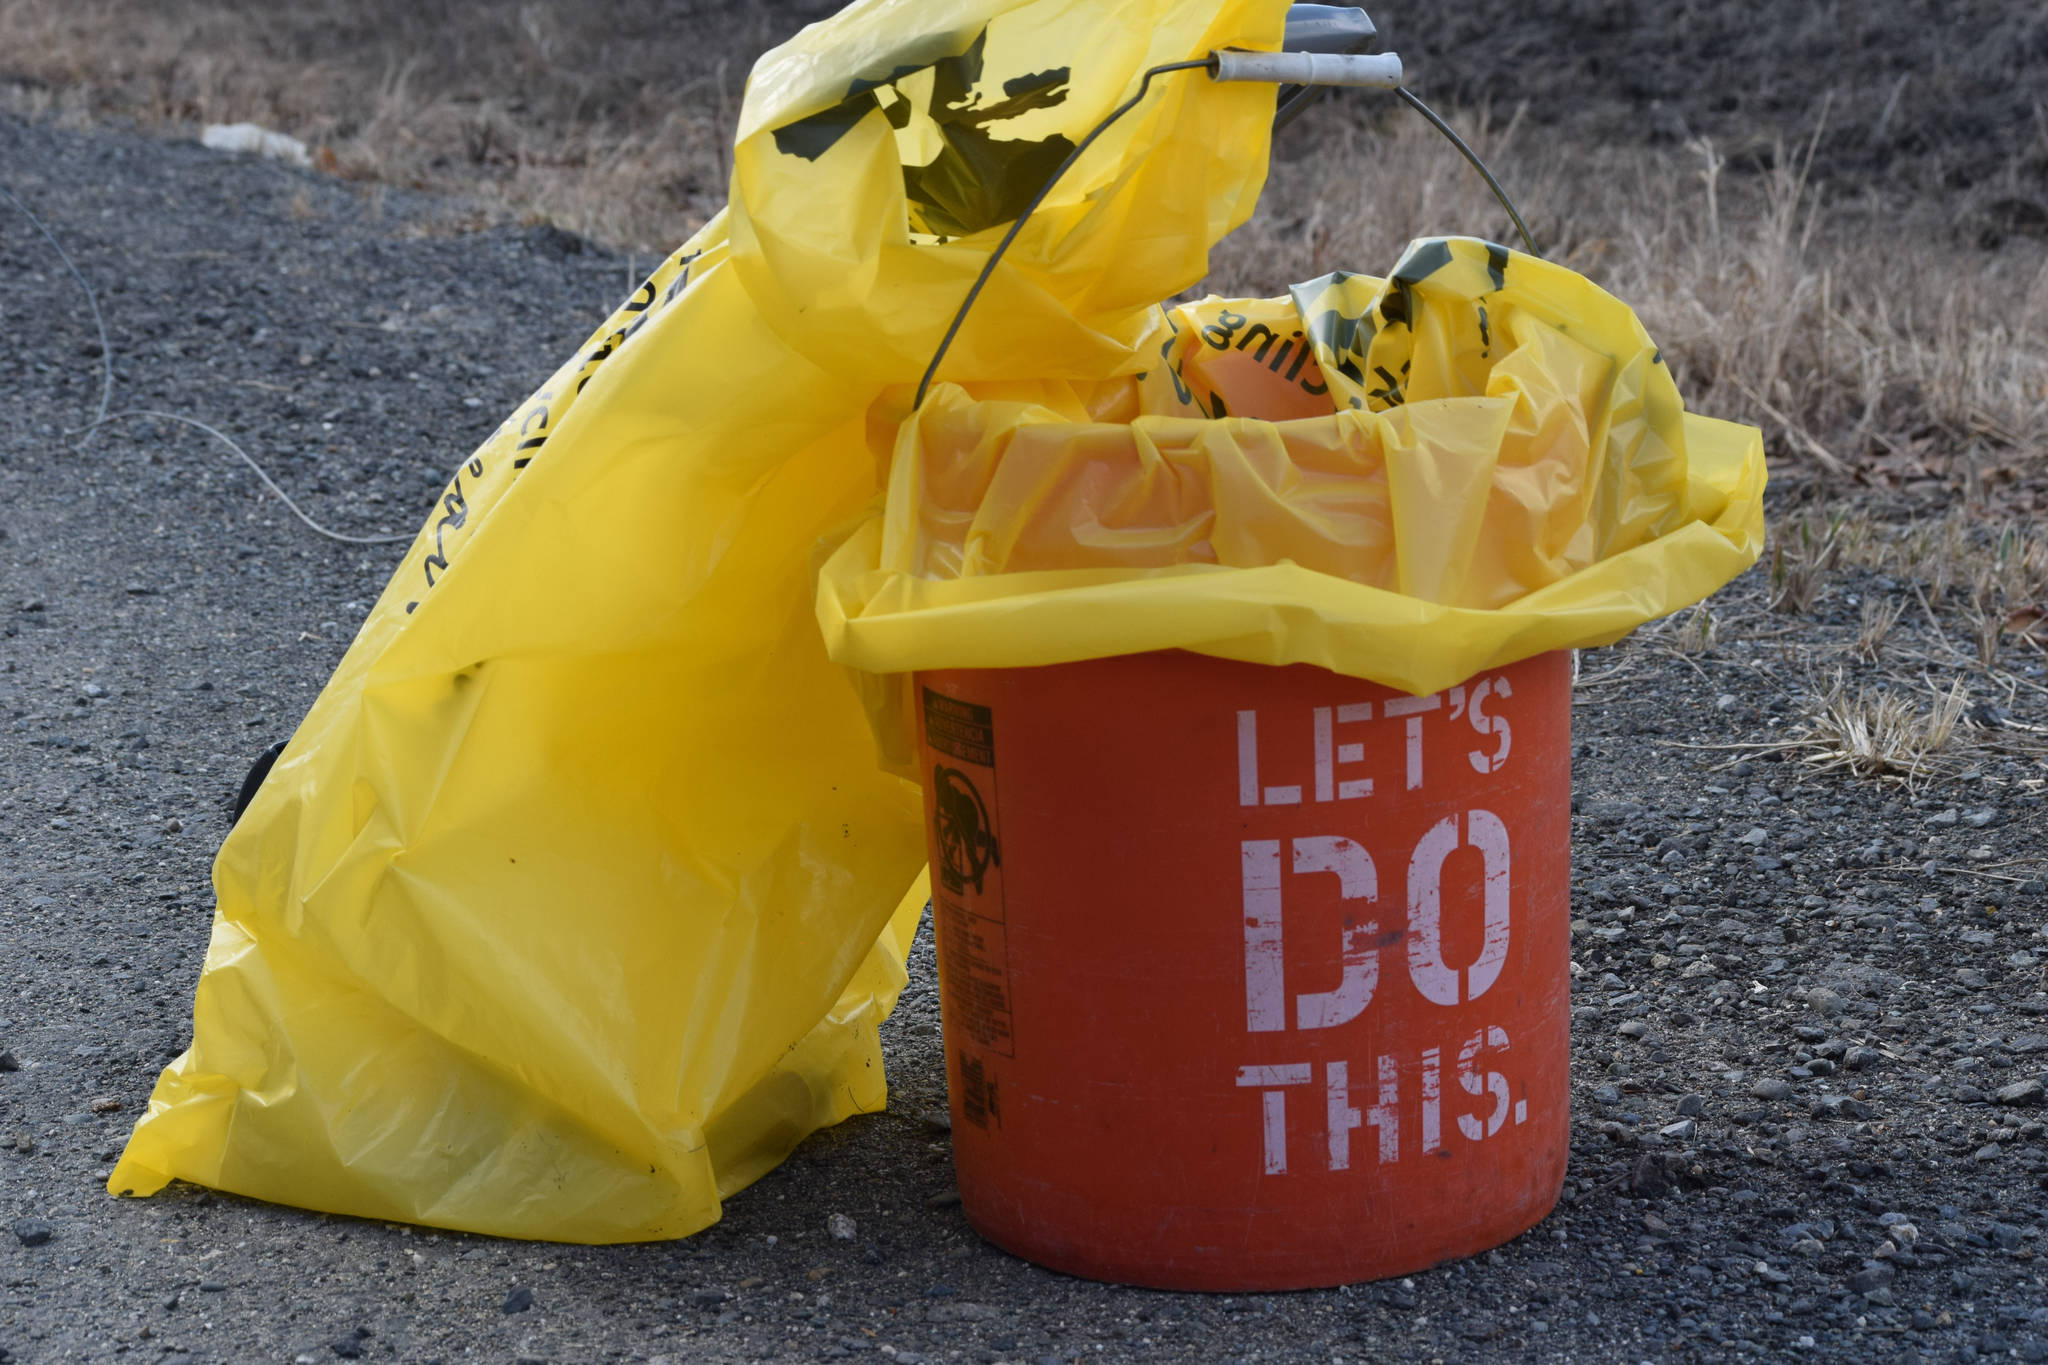 Litter-collecting supplies were distributed to volunteers at the Kenai National Wildlife Refuge in Soldotna, Alaska, on Friday, April 30, 2021. (Camille Botello / Peninsula Clarion)